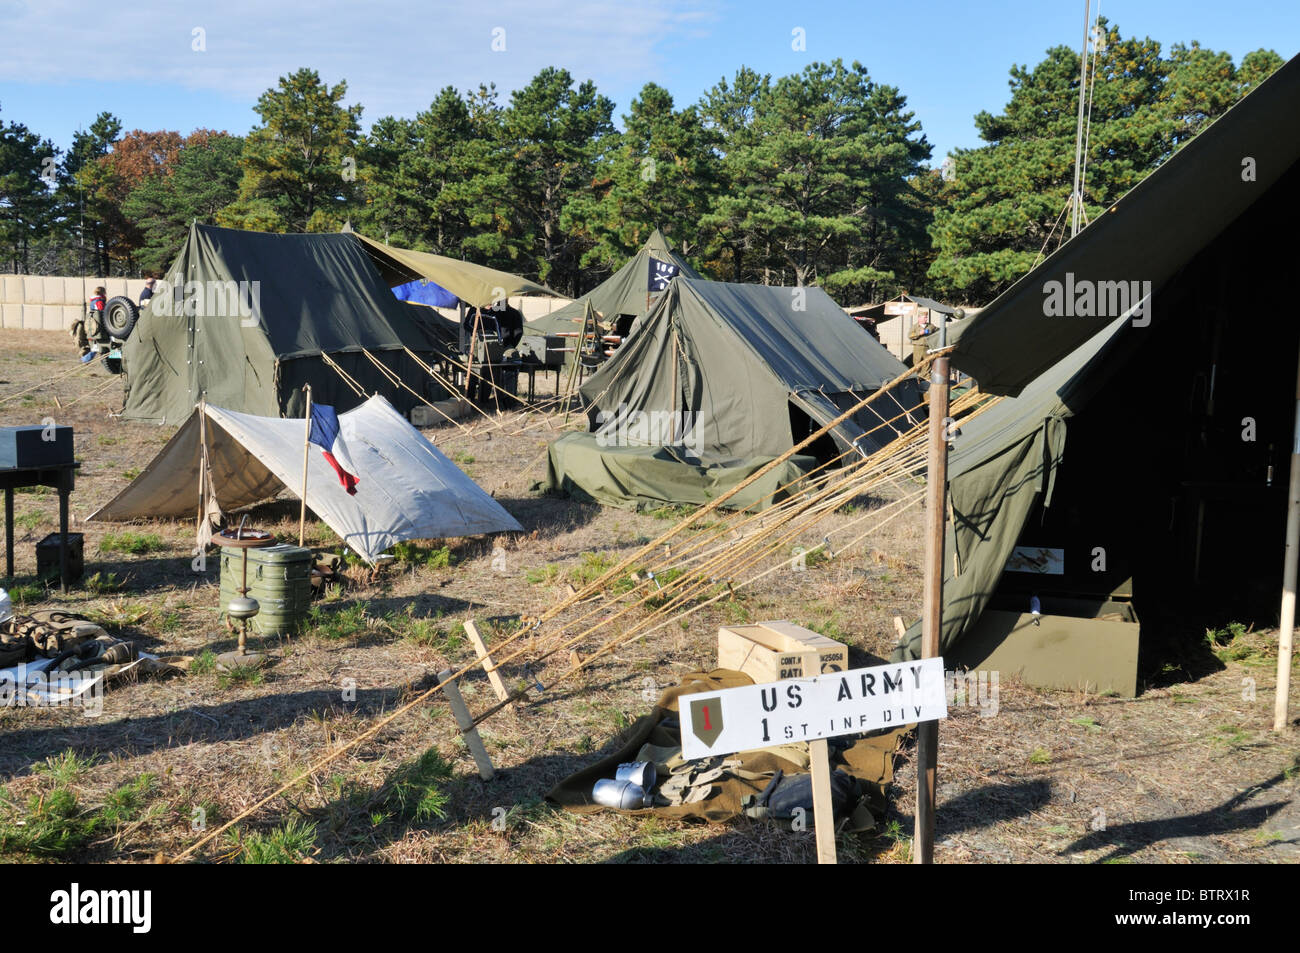 Reenactment of a US Army camp during World War II at an open house at Camp Edwards on the Massachusetts Military Reservation. Stock Photo